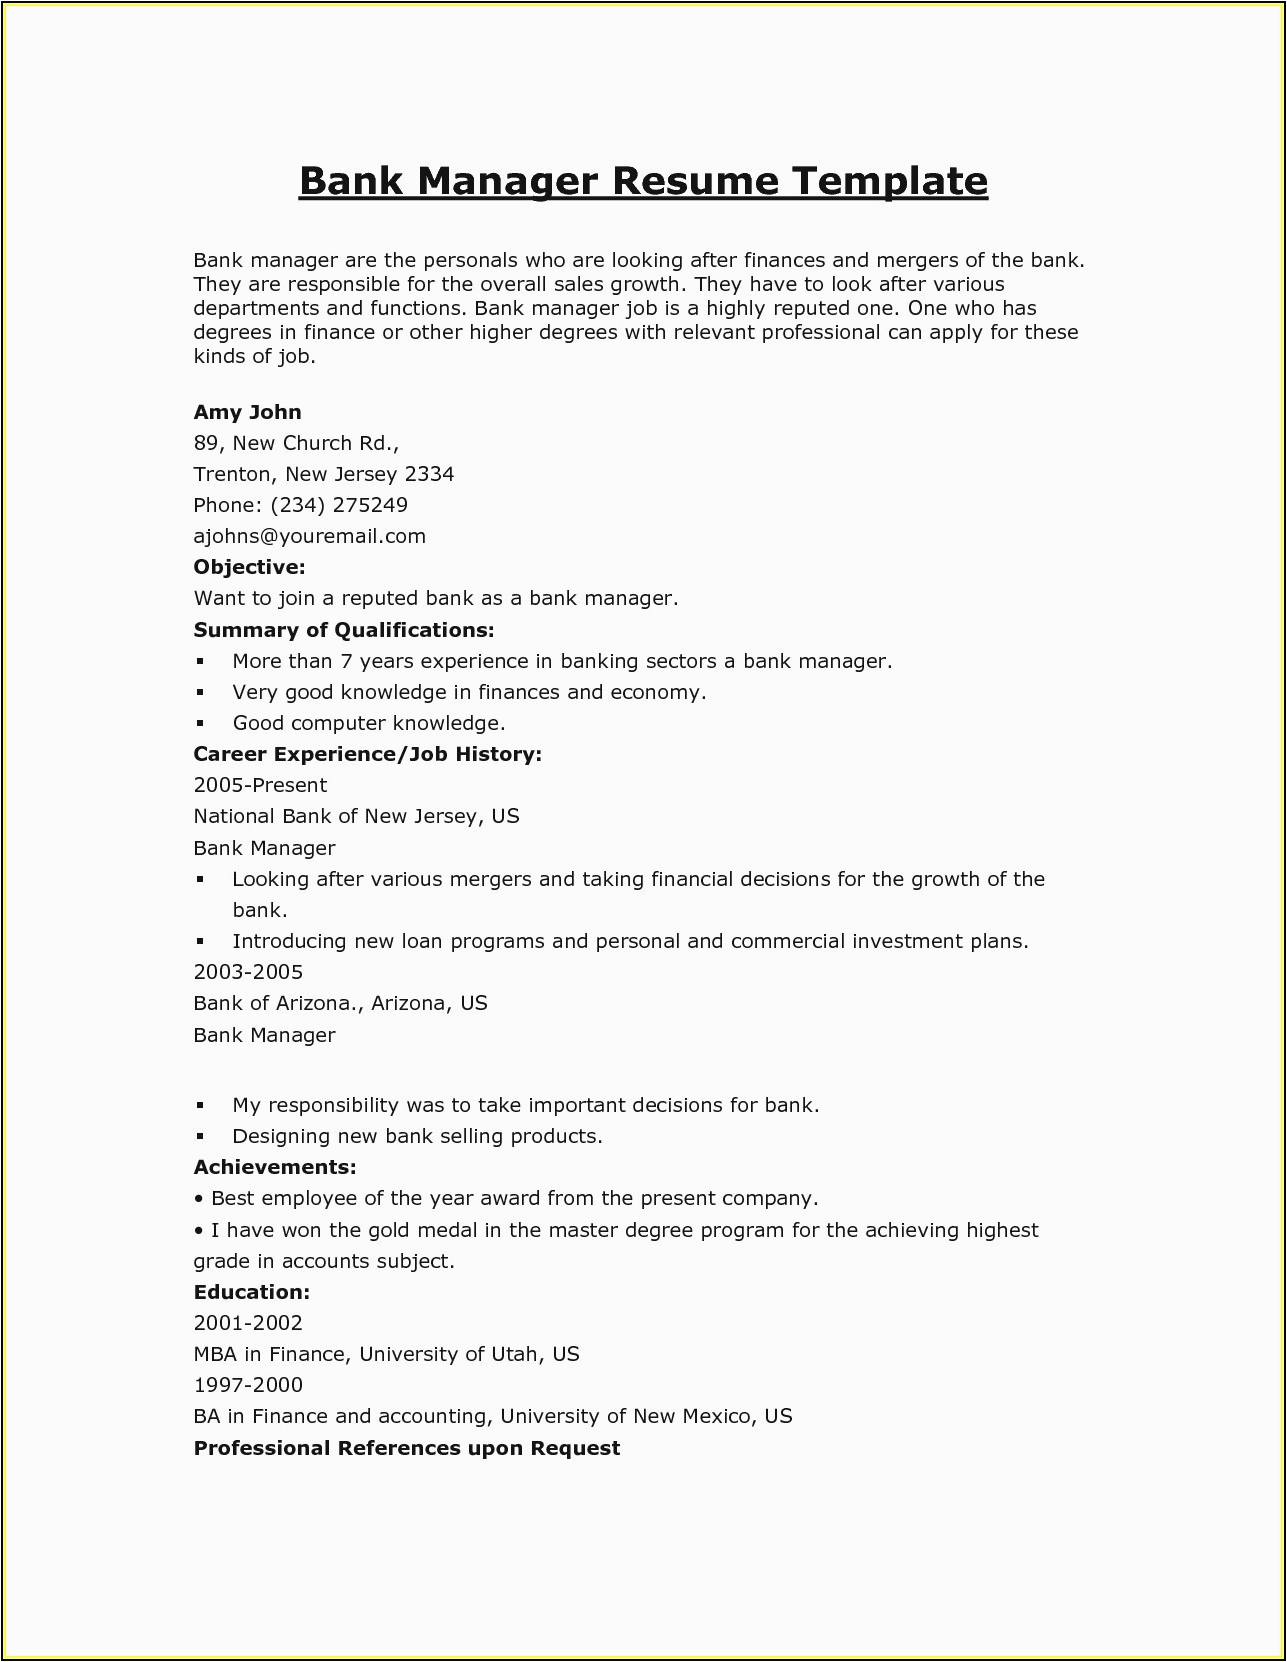 resume samples for banking jobs in india